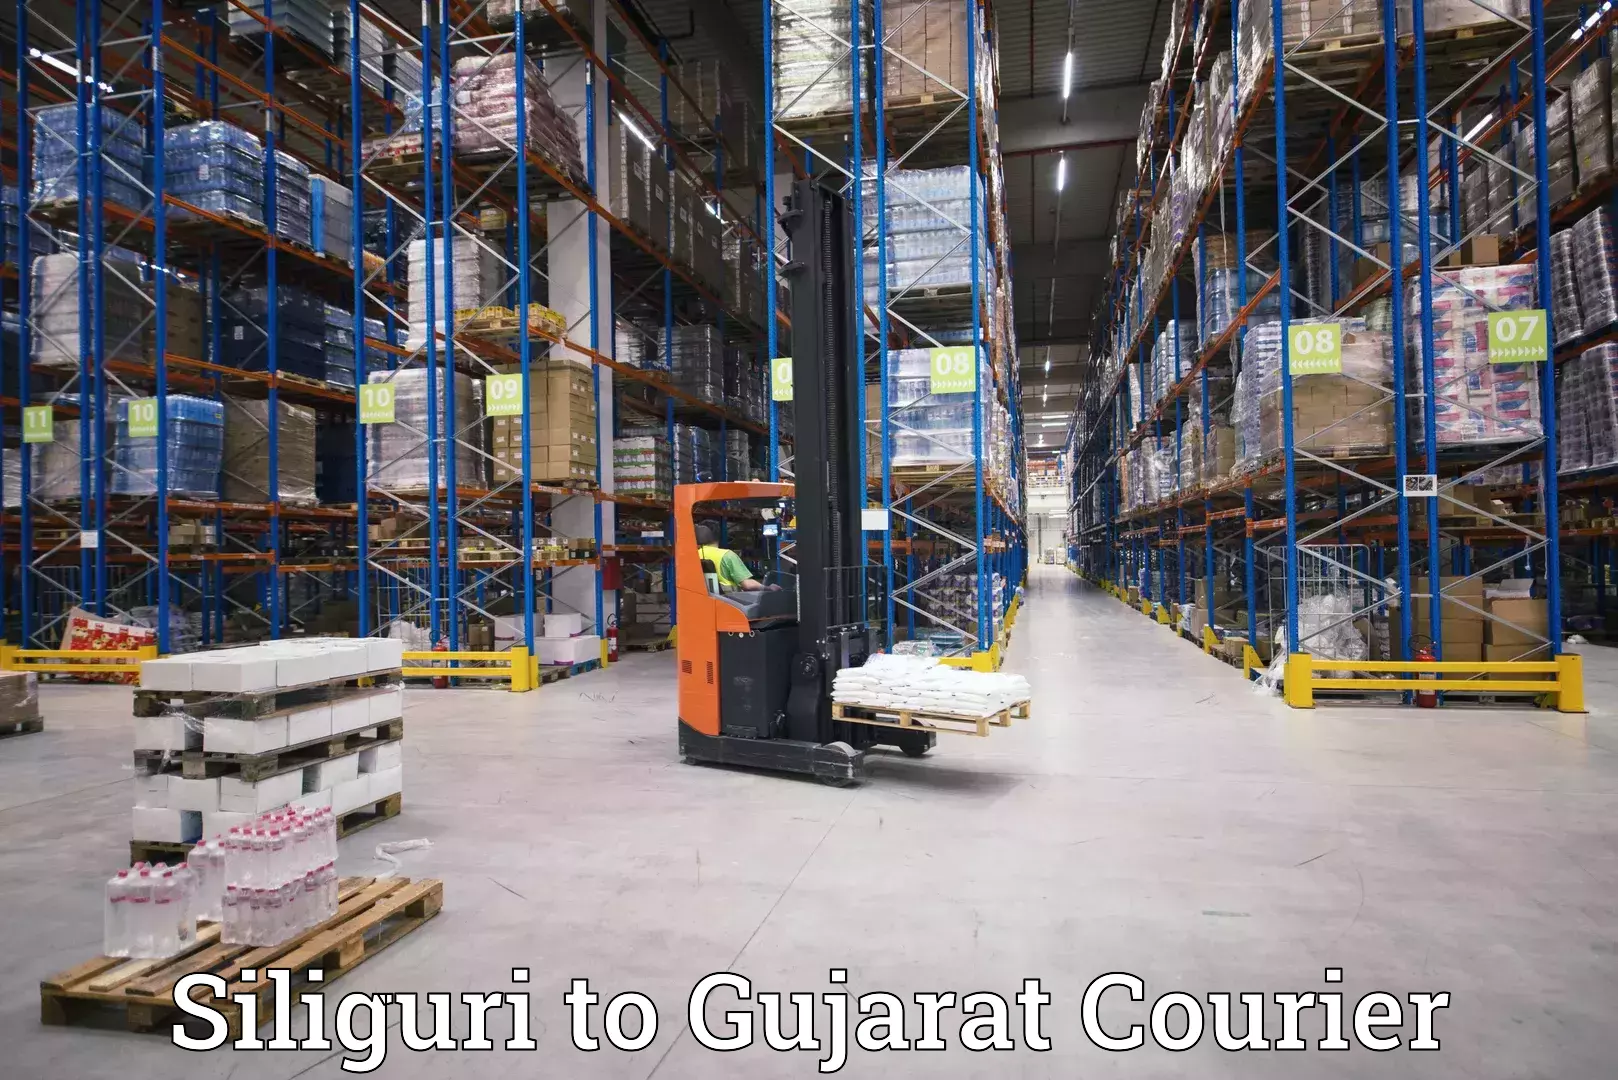 State-of-the-art courier technology Siliguri to Madhavpur